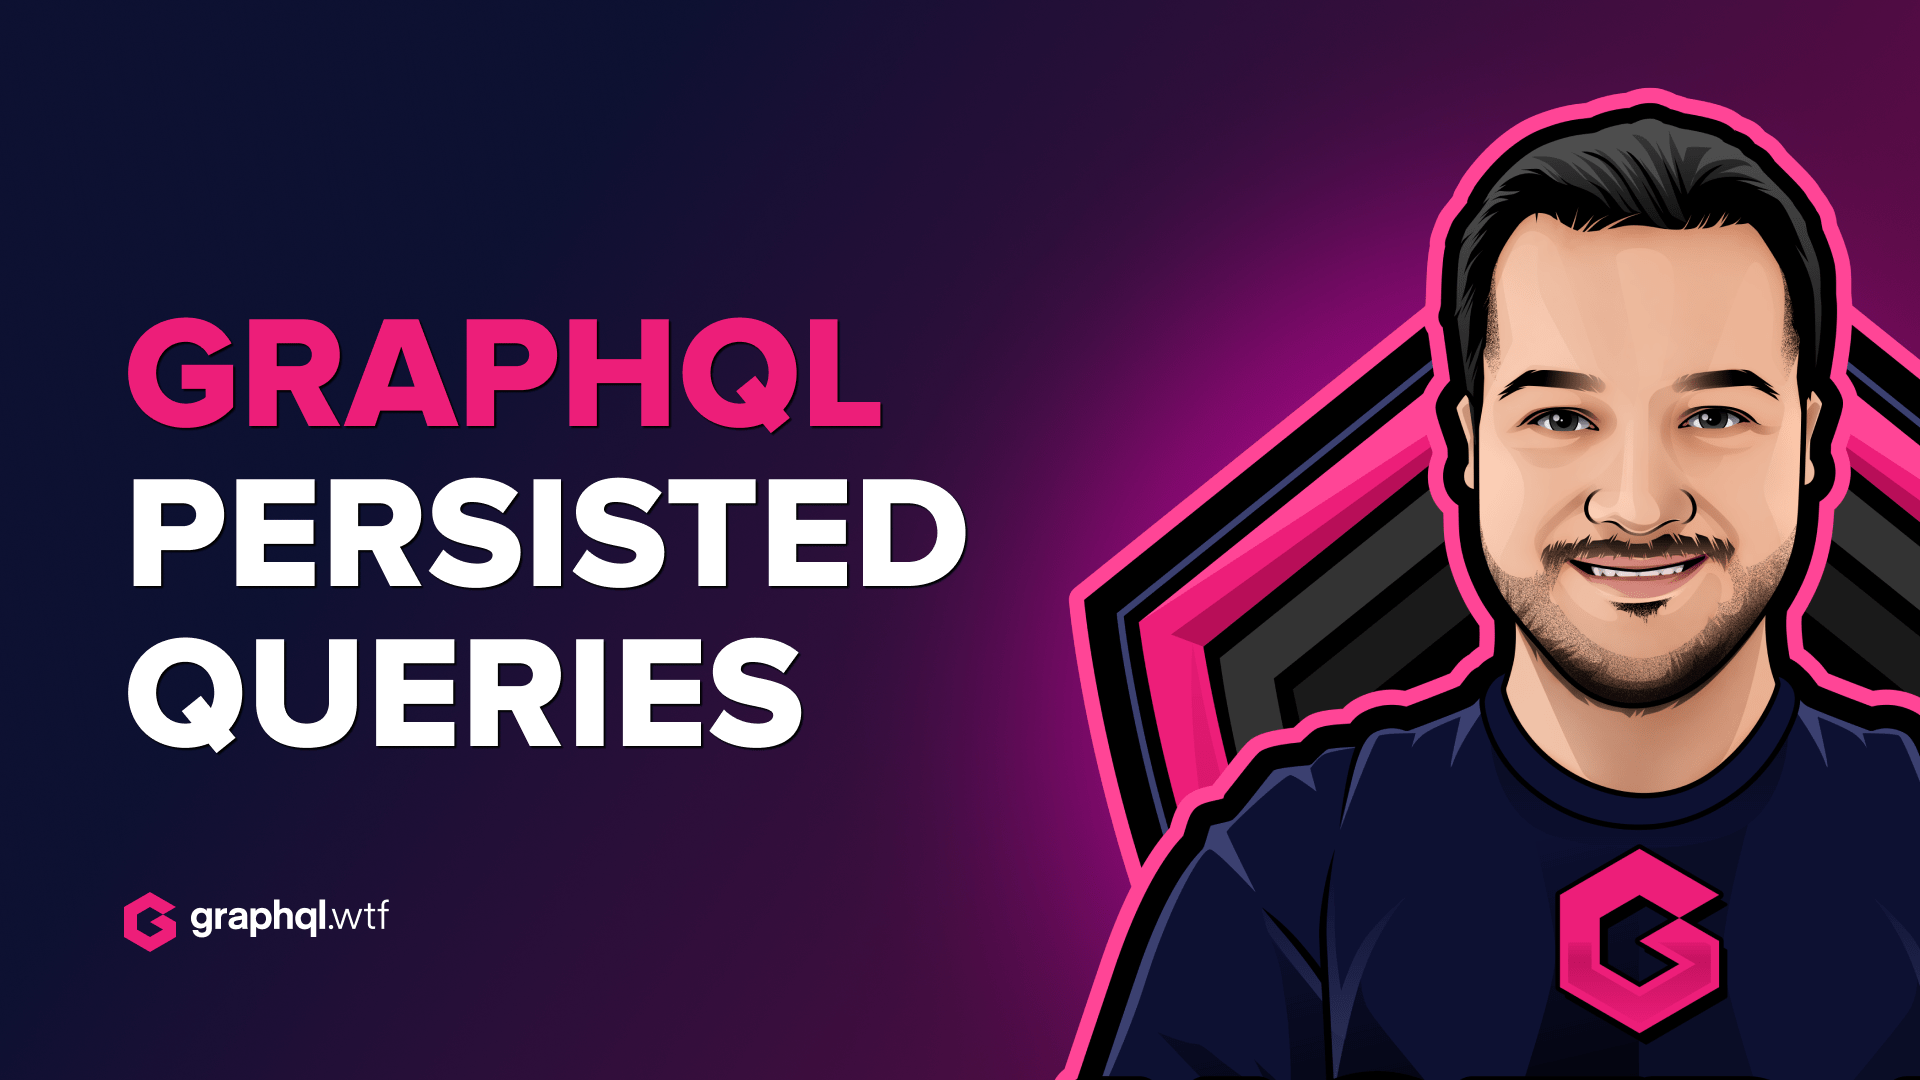 What ar GraphQL Persisted Queries?